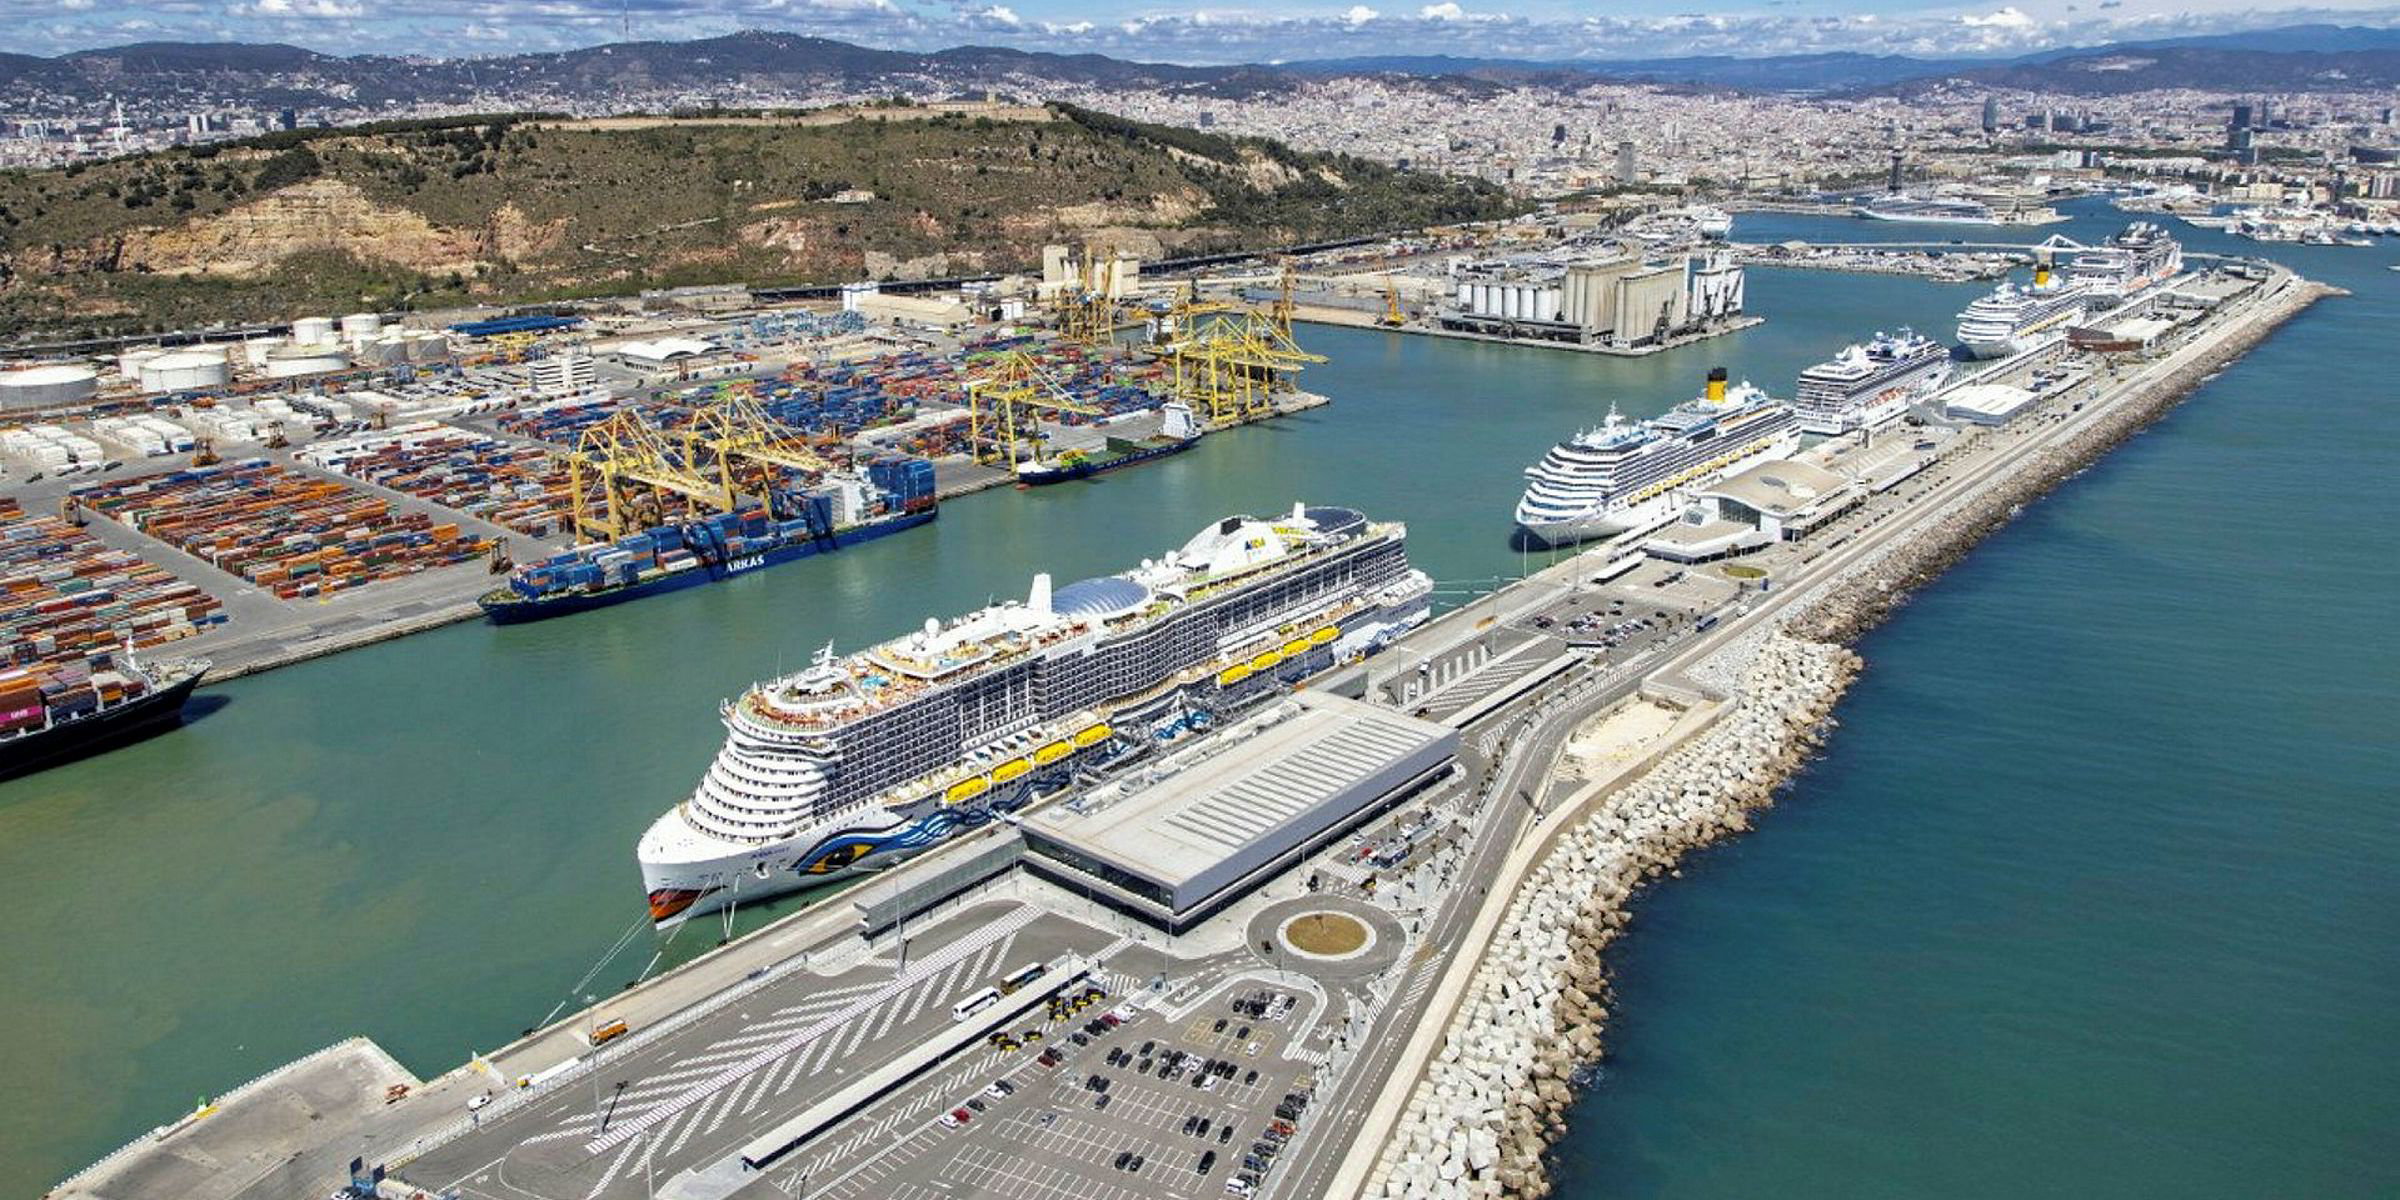 Barcelona seeks financing for cruise projects amid Covid-19 | TradeWinds